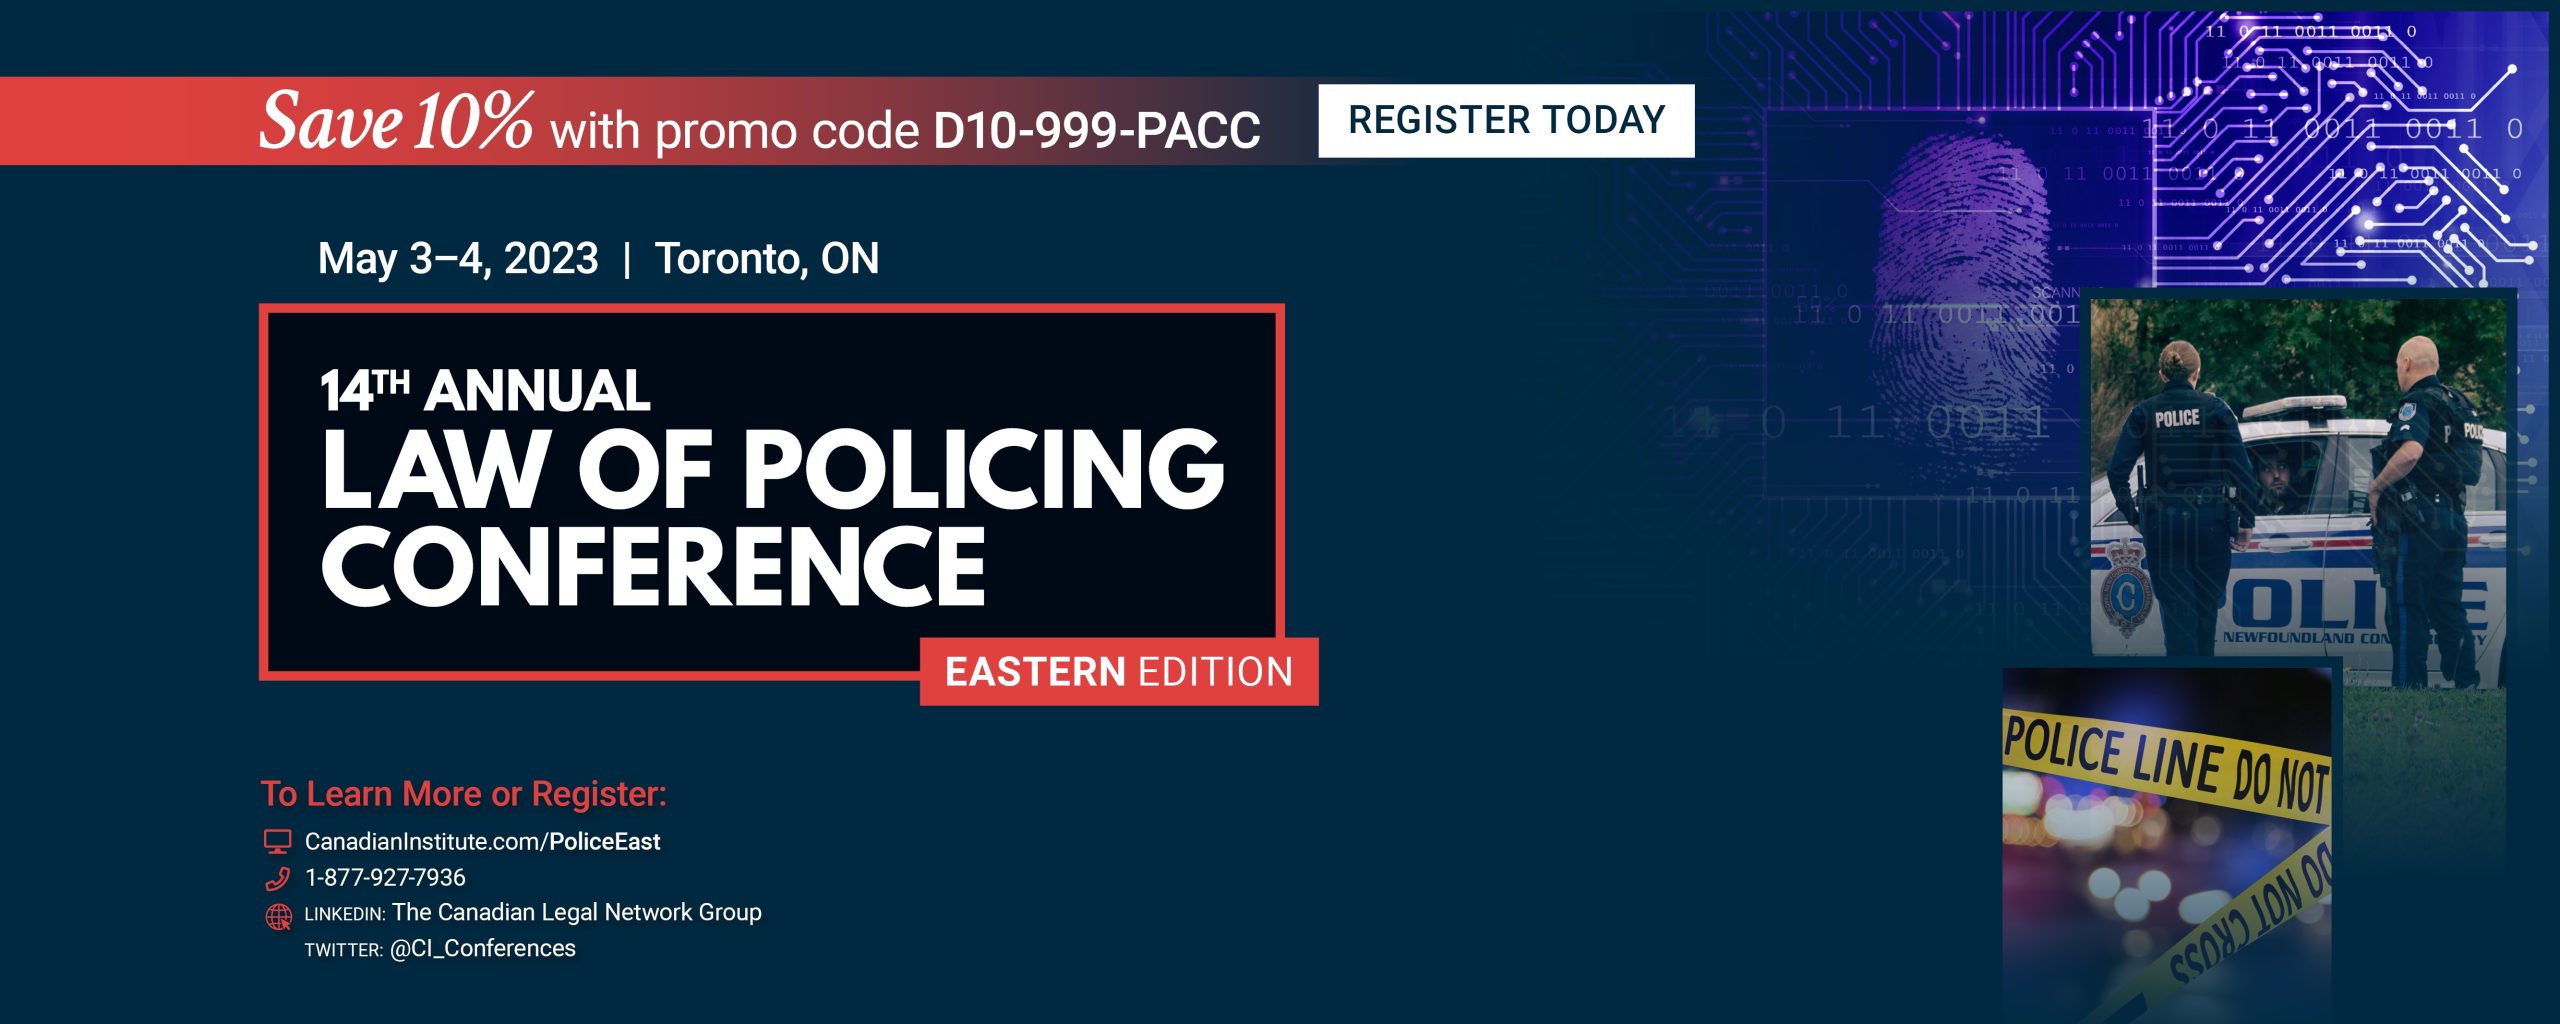 14th Annual Law of Policing Conference, Eastern Edition